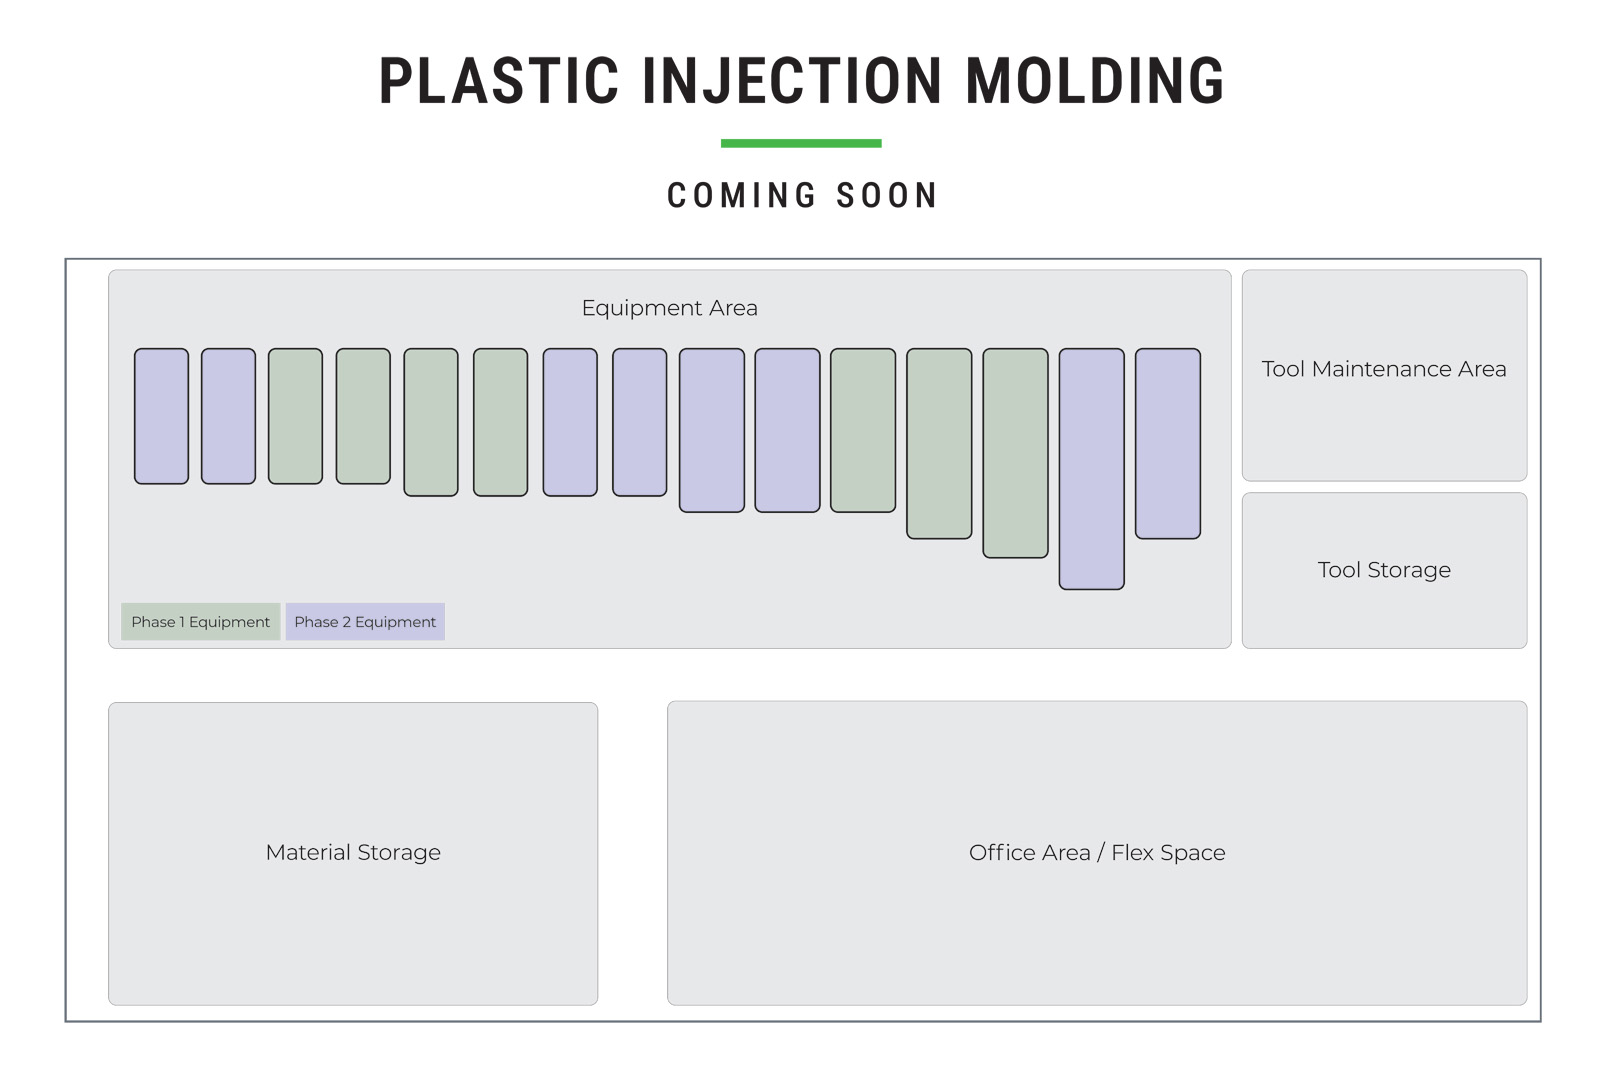 SEACOMP Mexico Plastic Injection Molding Phase Evolution